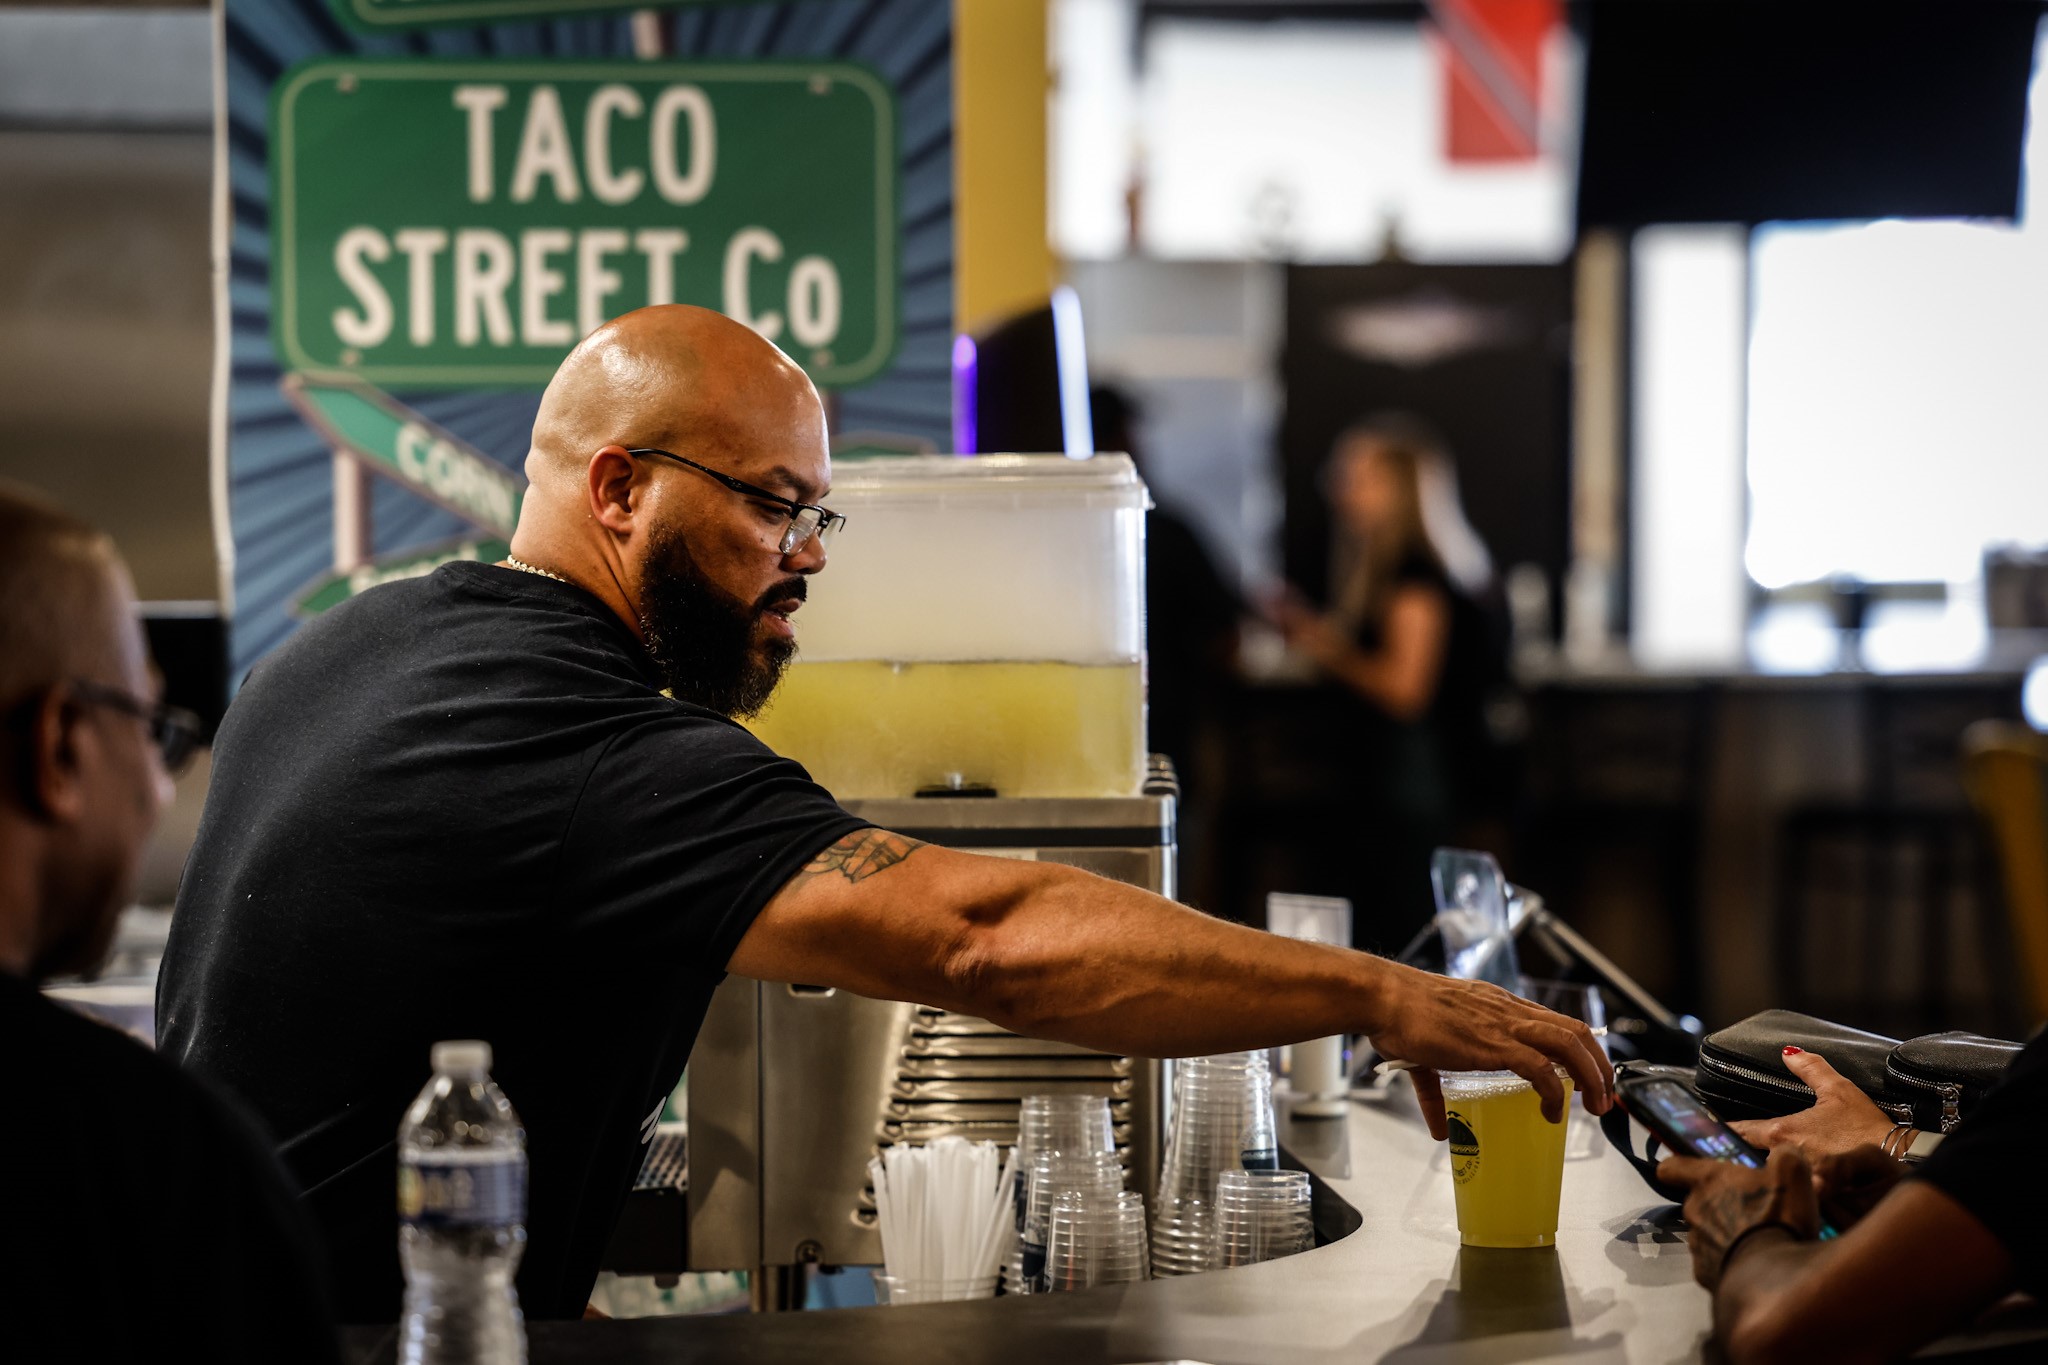 Taco Street Co. owner, Anthony Thomas fixes drinks at his store inside West Social Tap and Table at 1100 West Third St. The food hall features six local restaurants and a bar and plans to open July 25, 2022. JIM NOELKER/STAFF